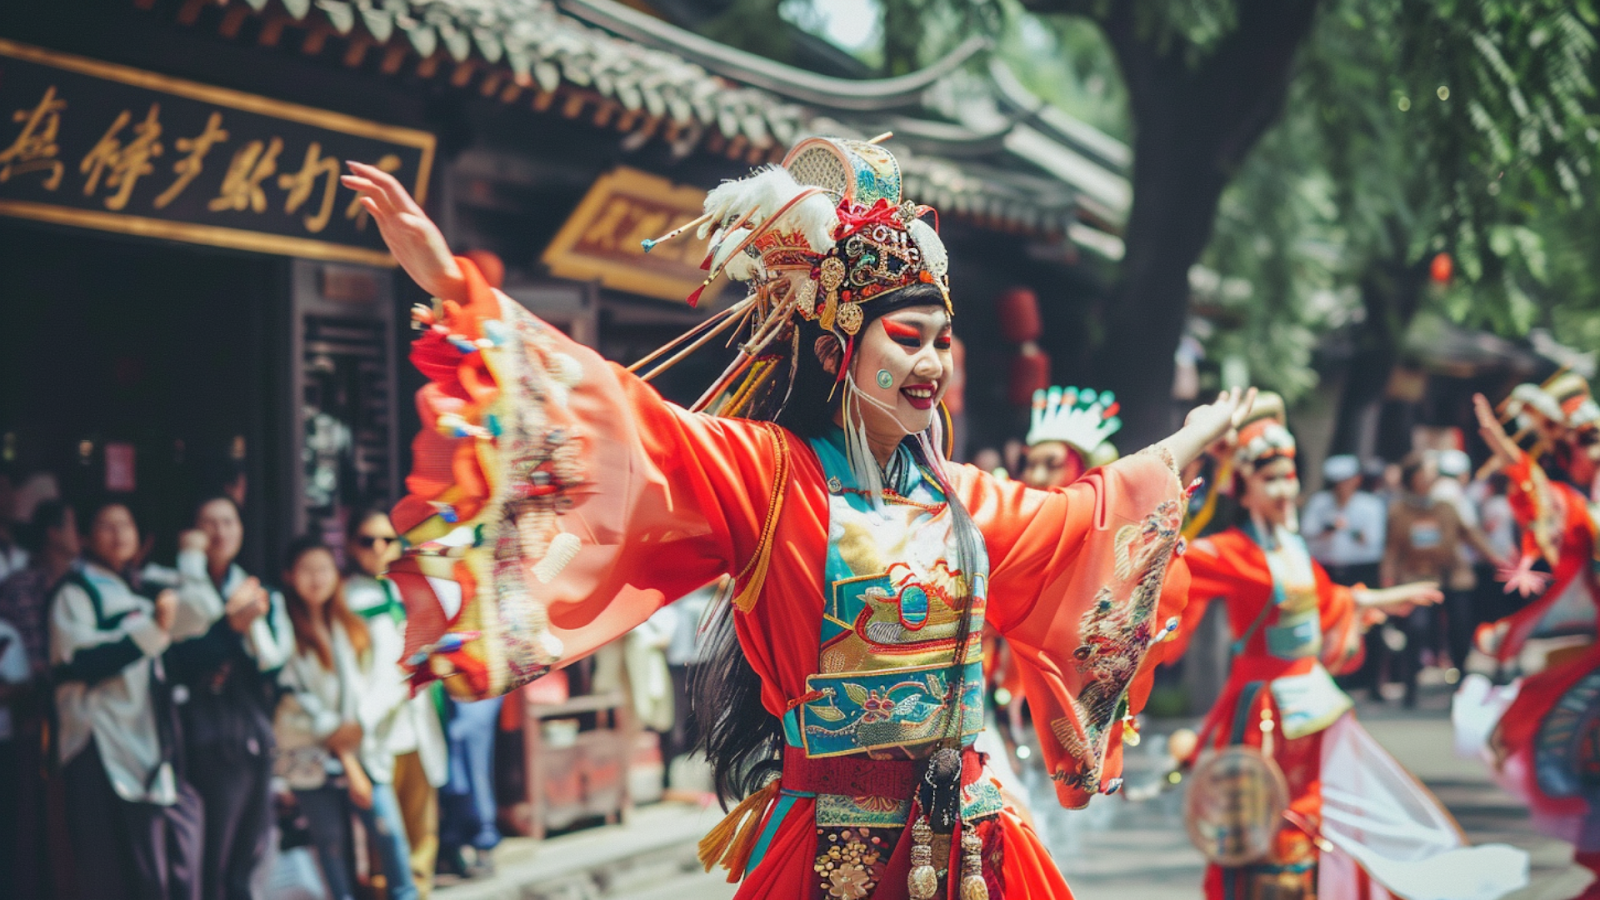 A woman in a colorful costume performing a traditional dance in Shanghai, China